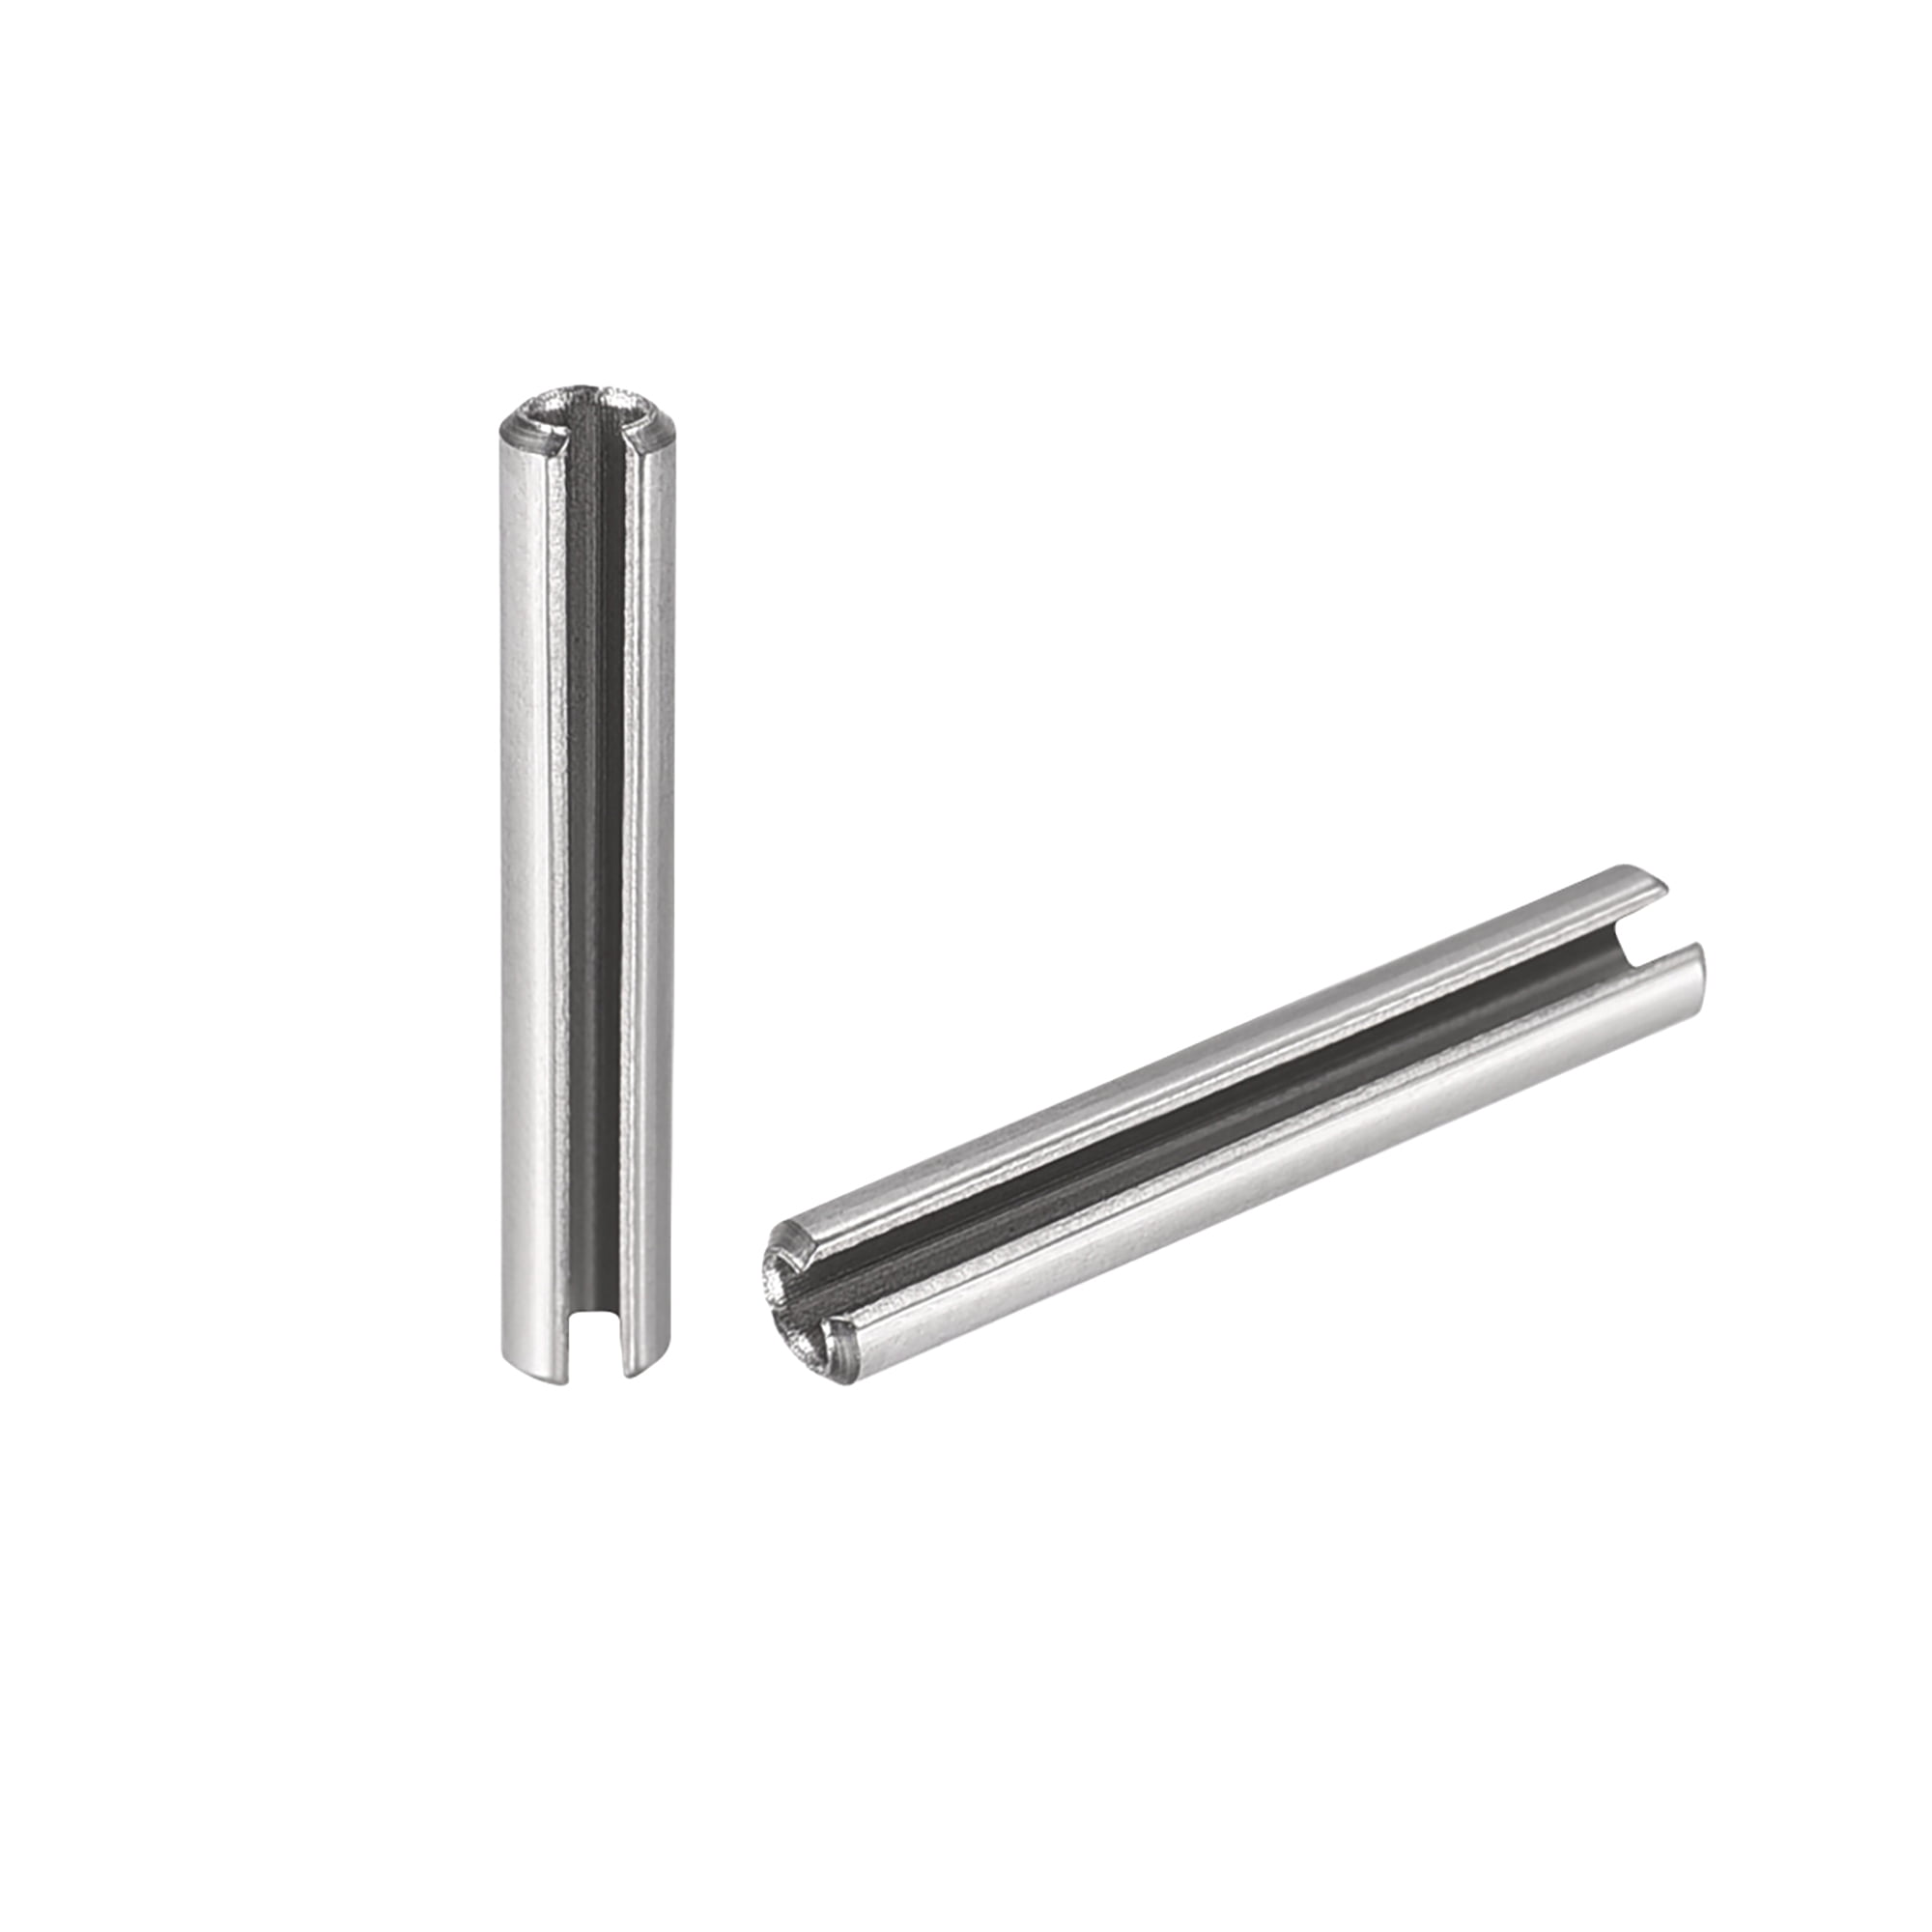 Details about   Dowel Pin 1/4 x 2-3/4 Cylindrical Pin Alloy Steel Plain Hardened 100 pcs 